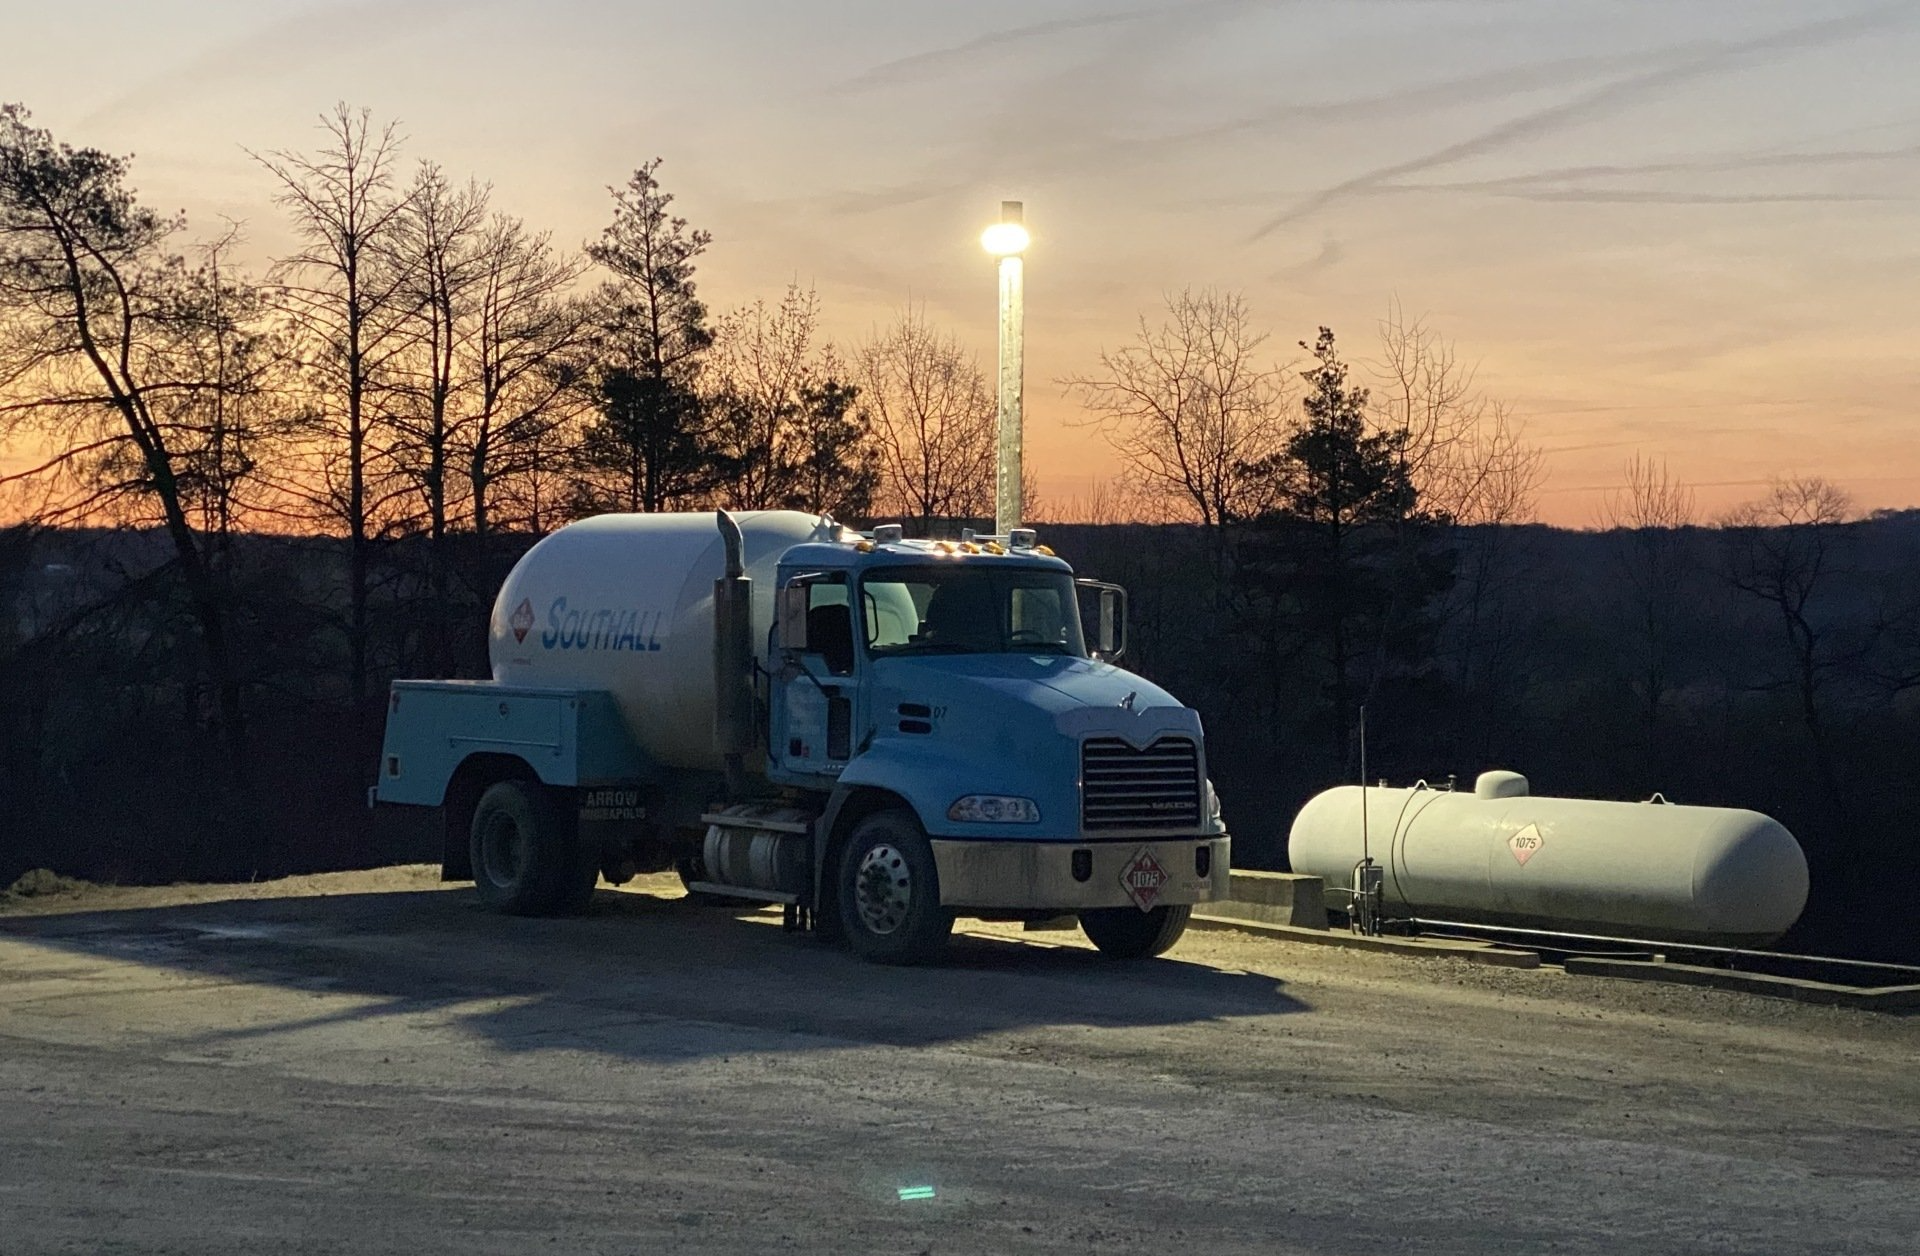 Trucks used for propane tank delivery in Titusville, PA